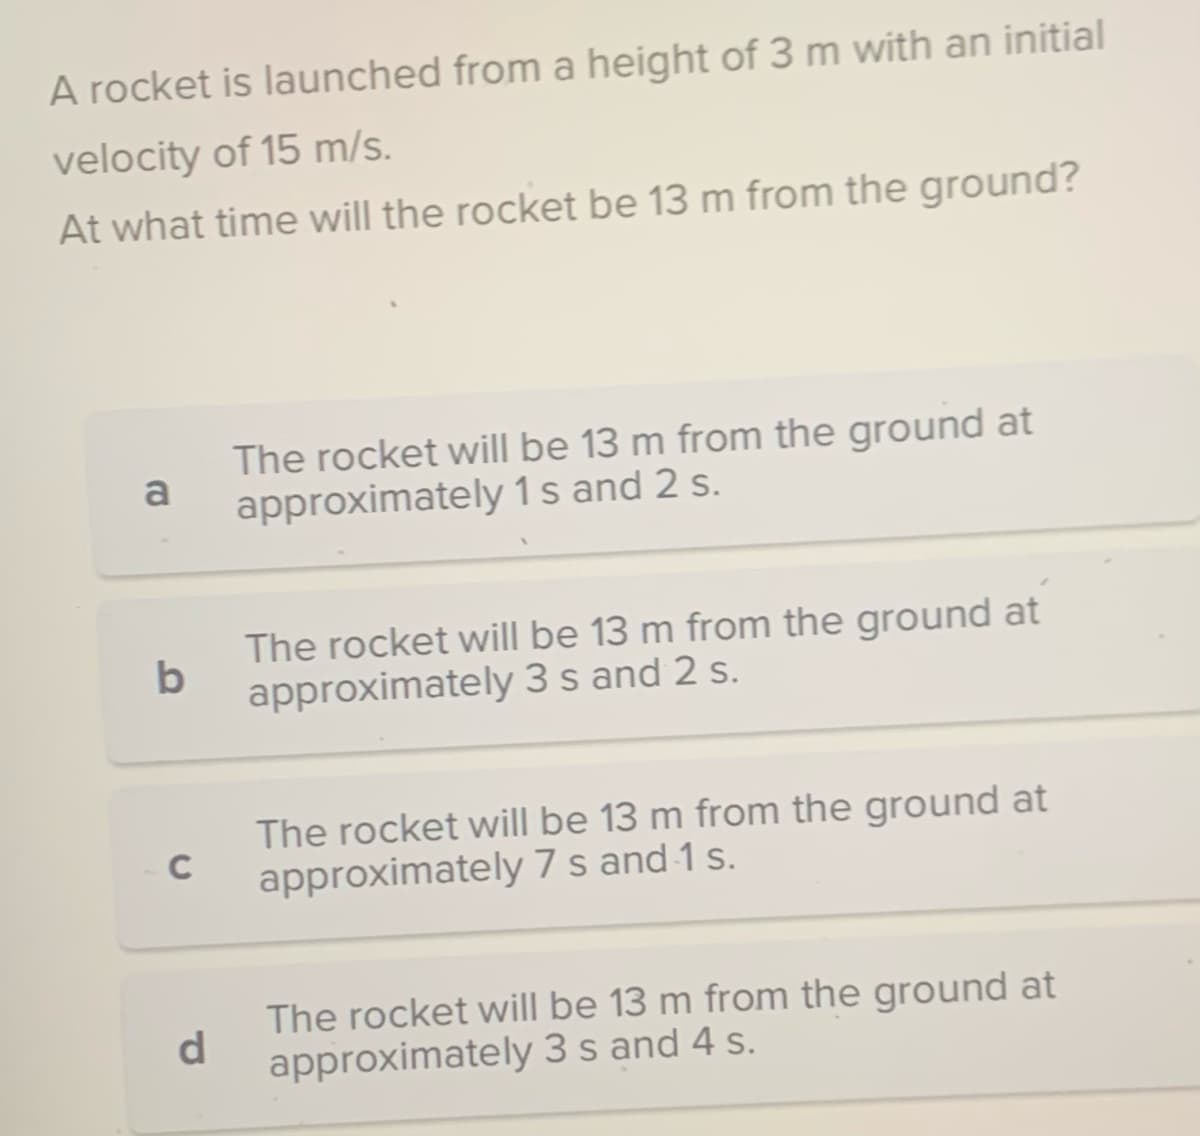 A rocket is launched from a height of 3 m with an initial
velocity of 15 m/s.
At what time will the rocket be 13 m from the ground?
a
b
C
d
The rocket will be 13 m from the ground at
approximately 1 s and 2 s.
The rocket will be 13 m from the ground at
approximately 3 s and 2 s.
The rocket will be 13 m from the ground at
approximately 7 s and 1 s.
The rocket will be 13 m from the ground at
approximately 3 s and 4 s.